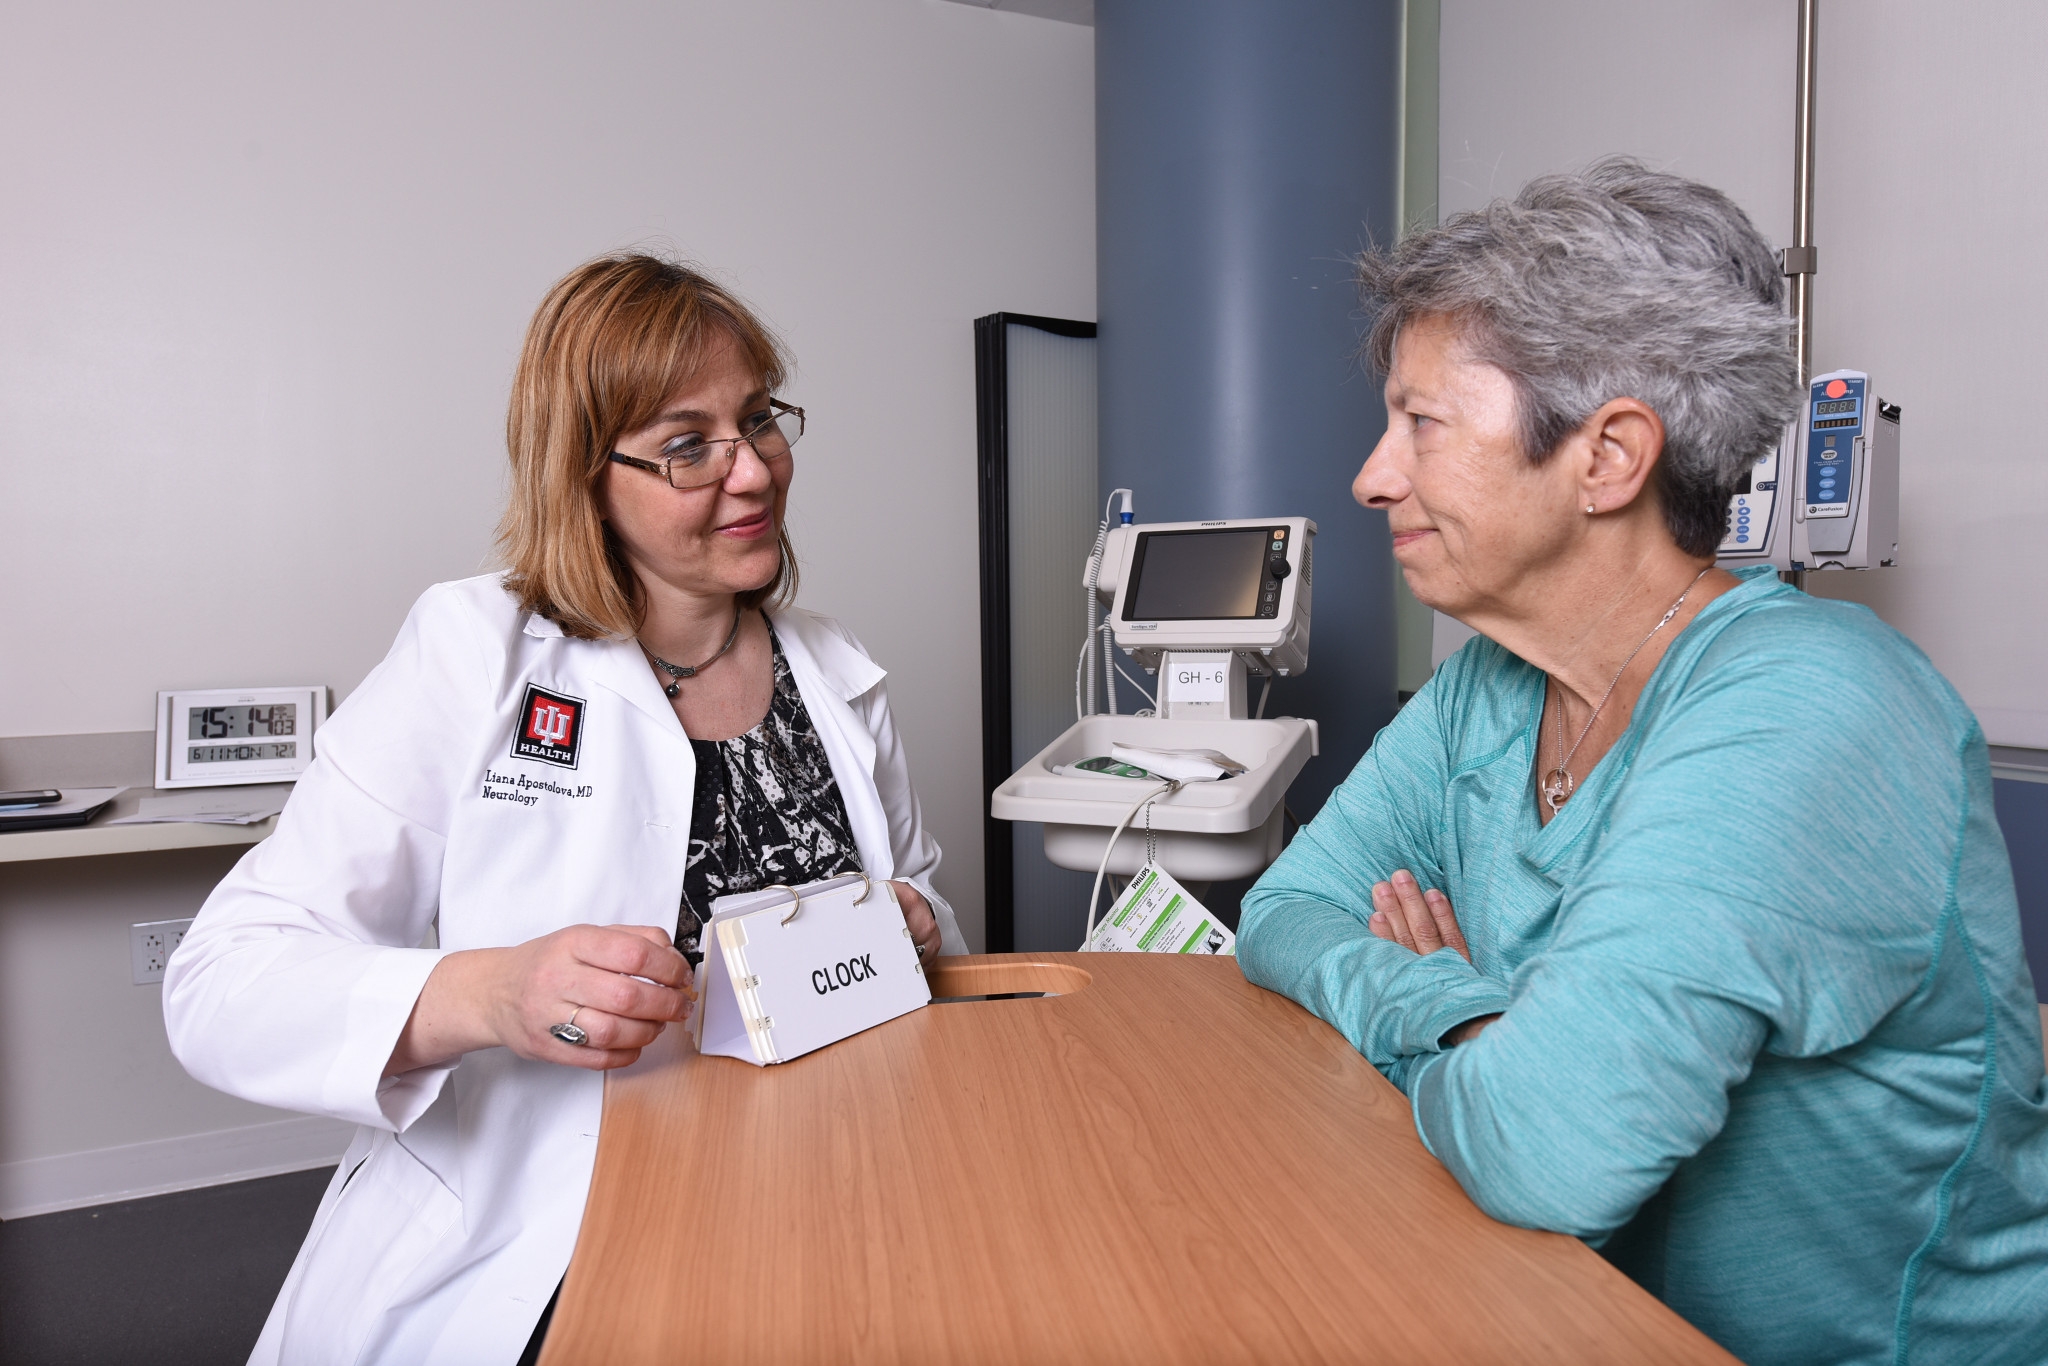 A physician is meeting with a patient